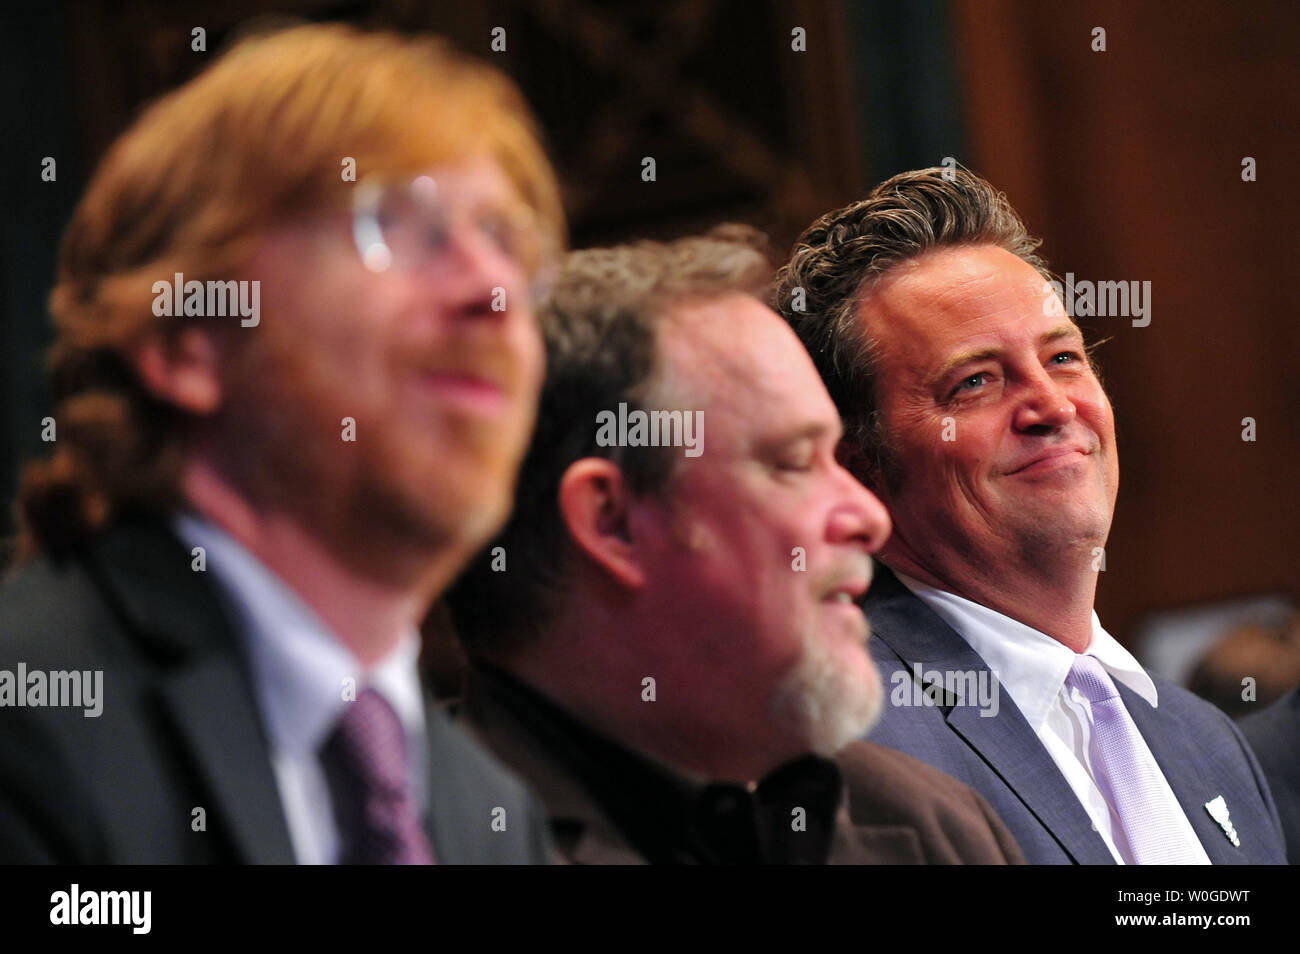 Actor Matthew Perry attends a Senate Judiciary Committee Crime and Judiciary Subcommittee hearing titled 'Drug and Veterans Treatment Courts: Seeking Cost-Effective Solutions for Protecting Public Safety and Reducing Recidivism,' on Capitol Hill in Washington, D.C. on July 19, 2011.  UPI/Kevin Dietsch Stock Photo